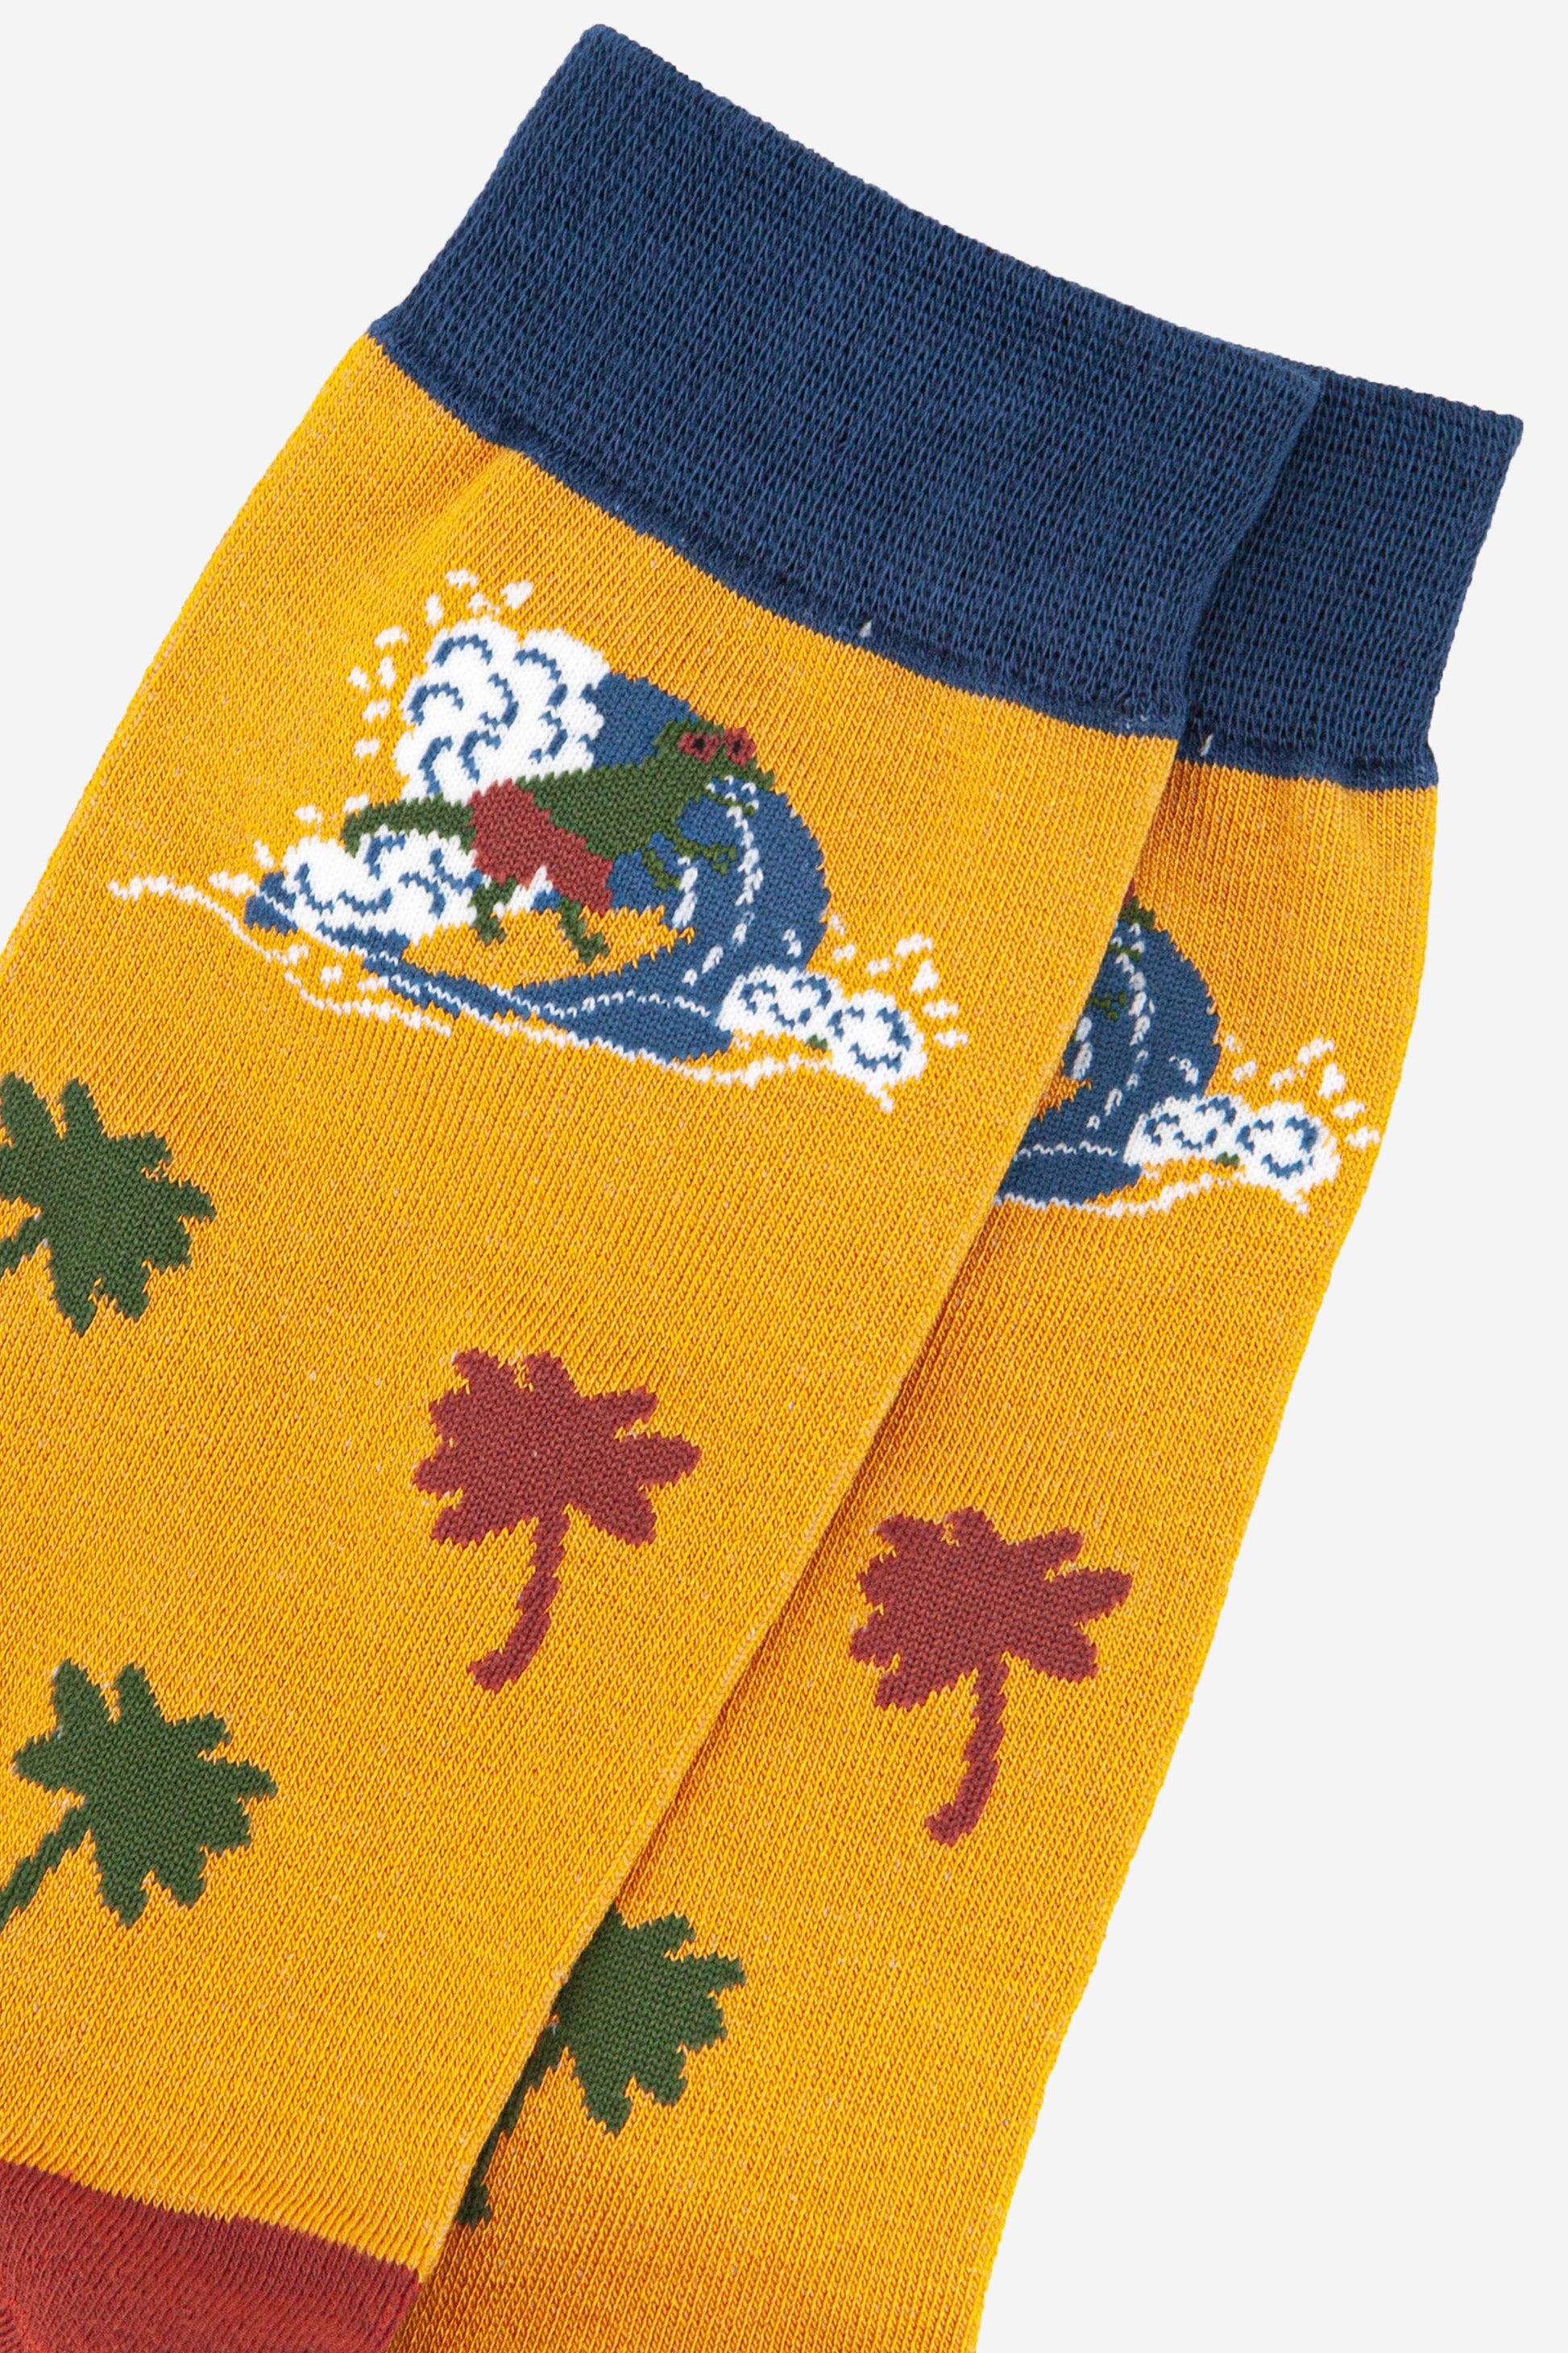 close up of the surfing dinosaur and palm tree design on the yellow and navy blue bamboo socks